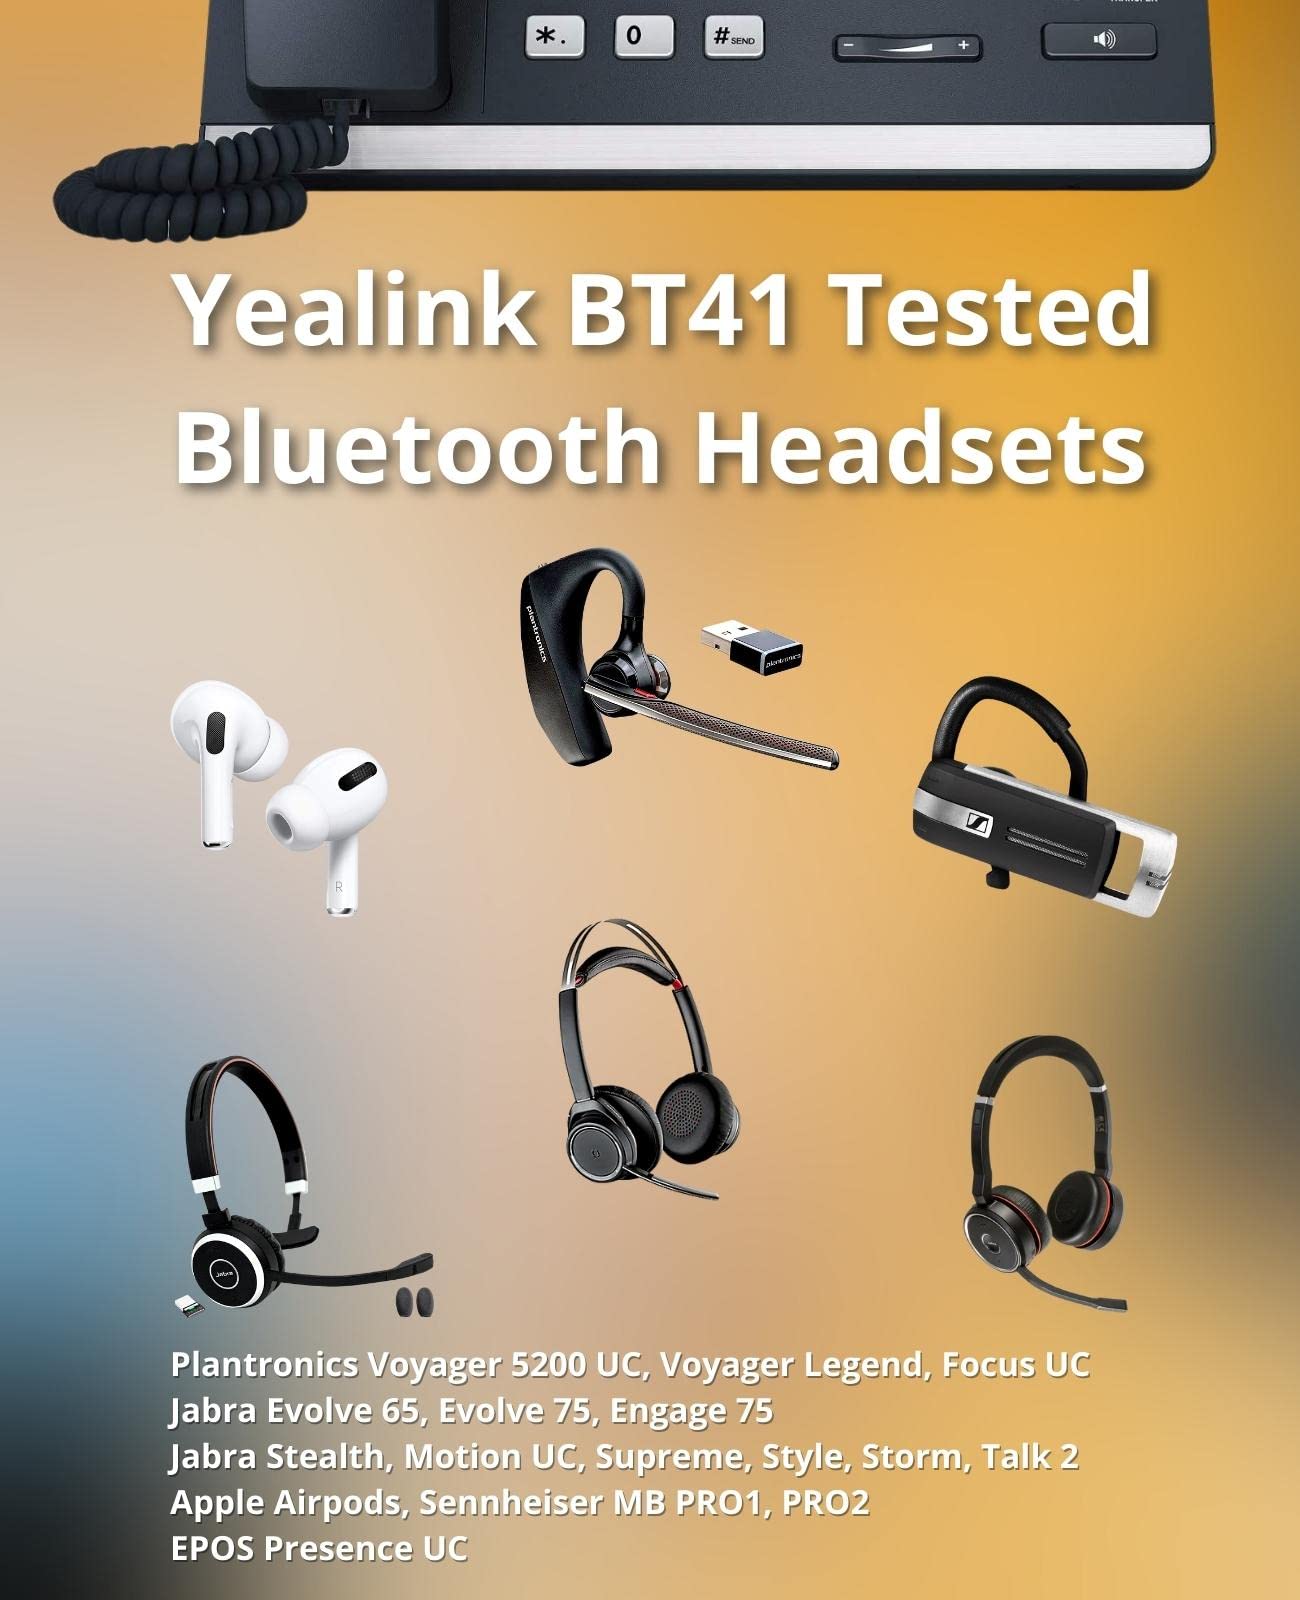 Yealink BT41 Bluetooth Adapter USB Dongle Accessory for Headphones/Headsets - for Yealink IP Phones T27G, T29G, T46G, T48G, T41S, T42S, T46S, T48S, T53, GTW Microfiber